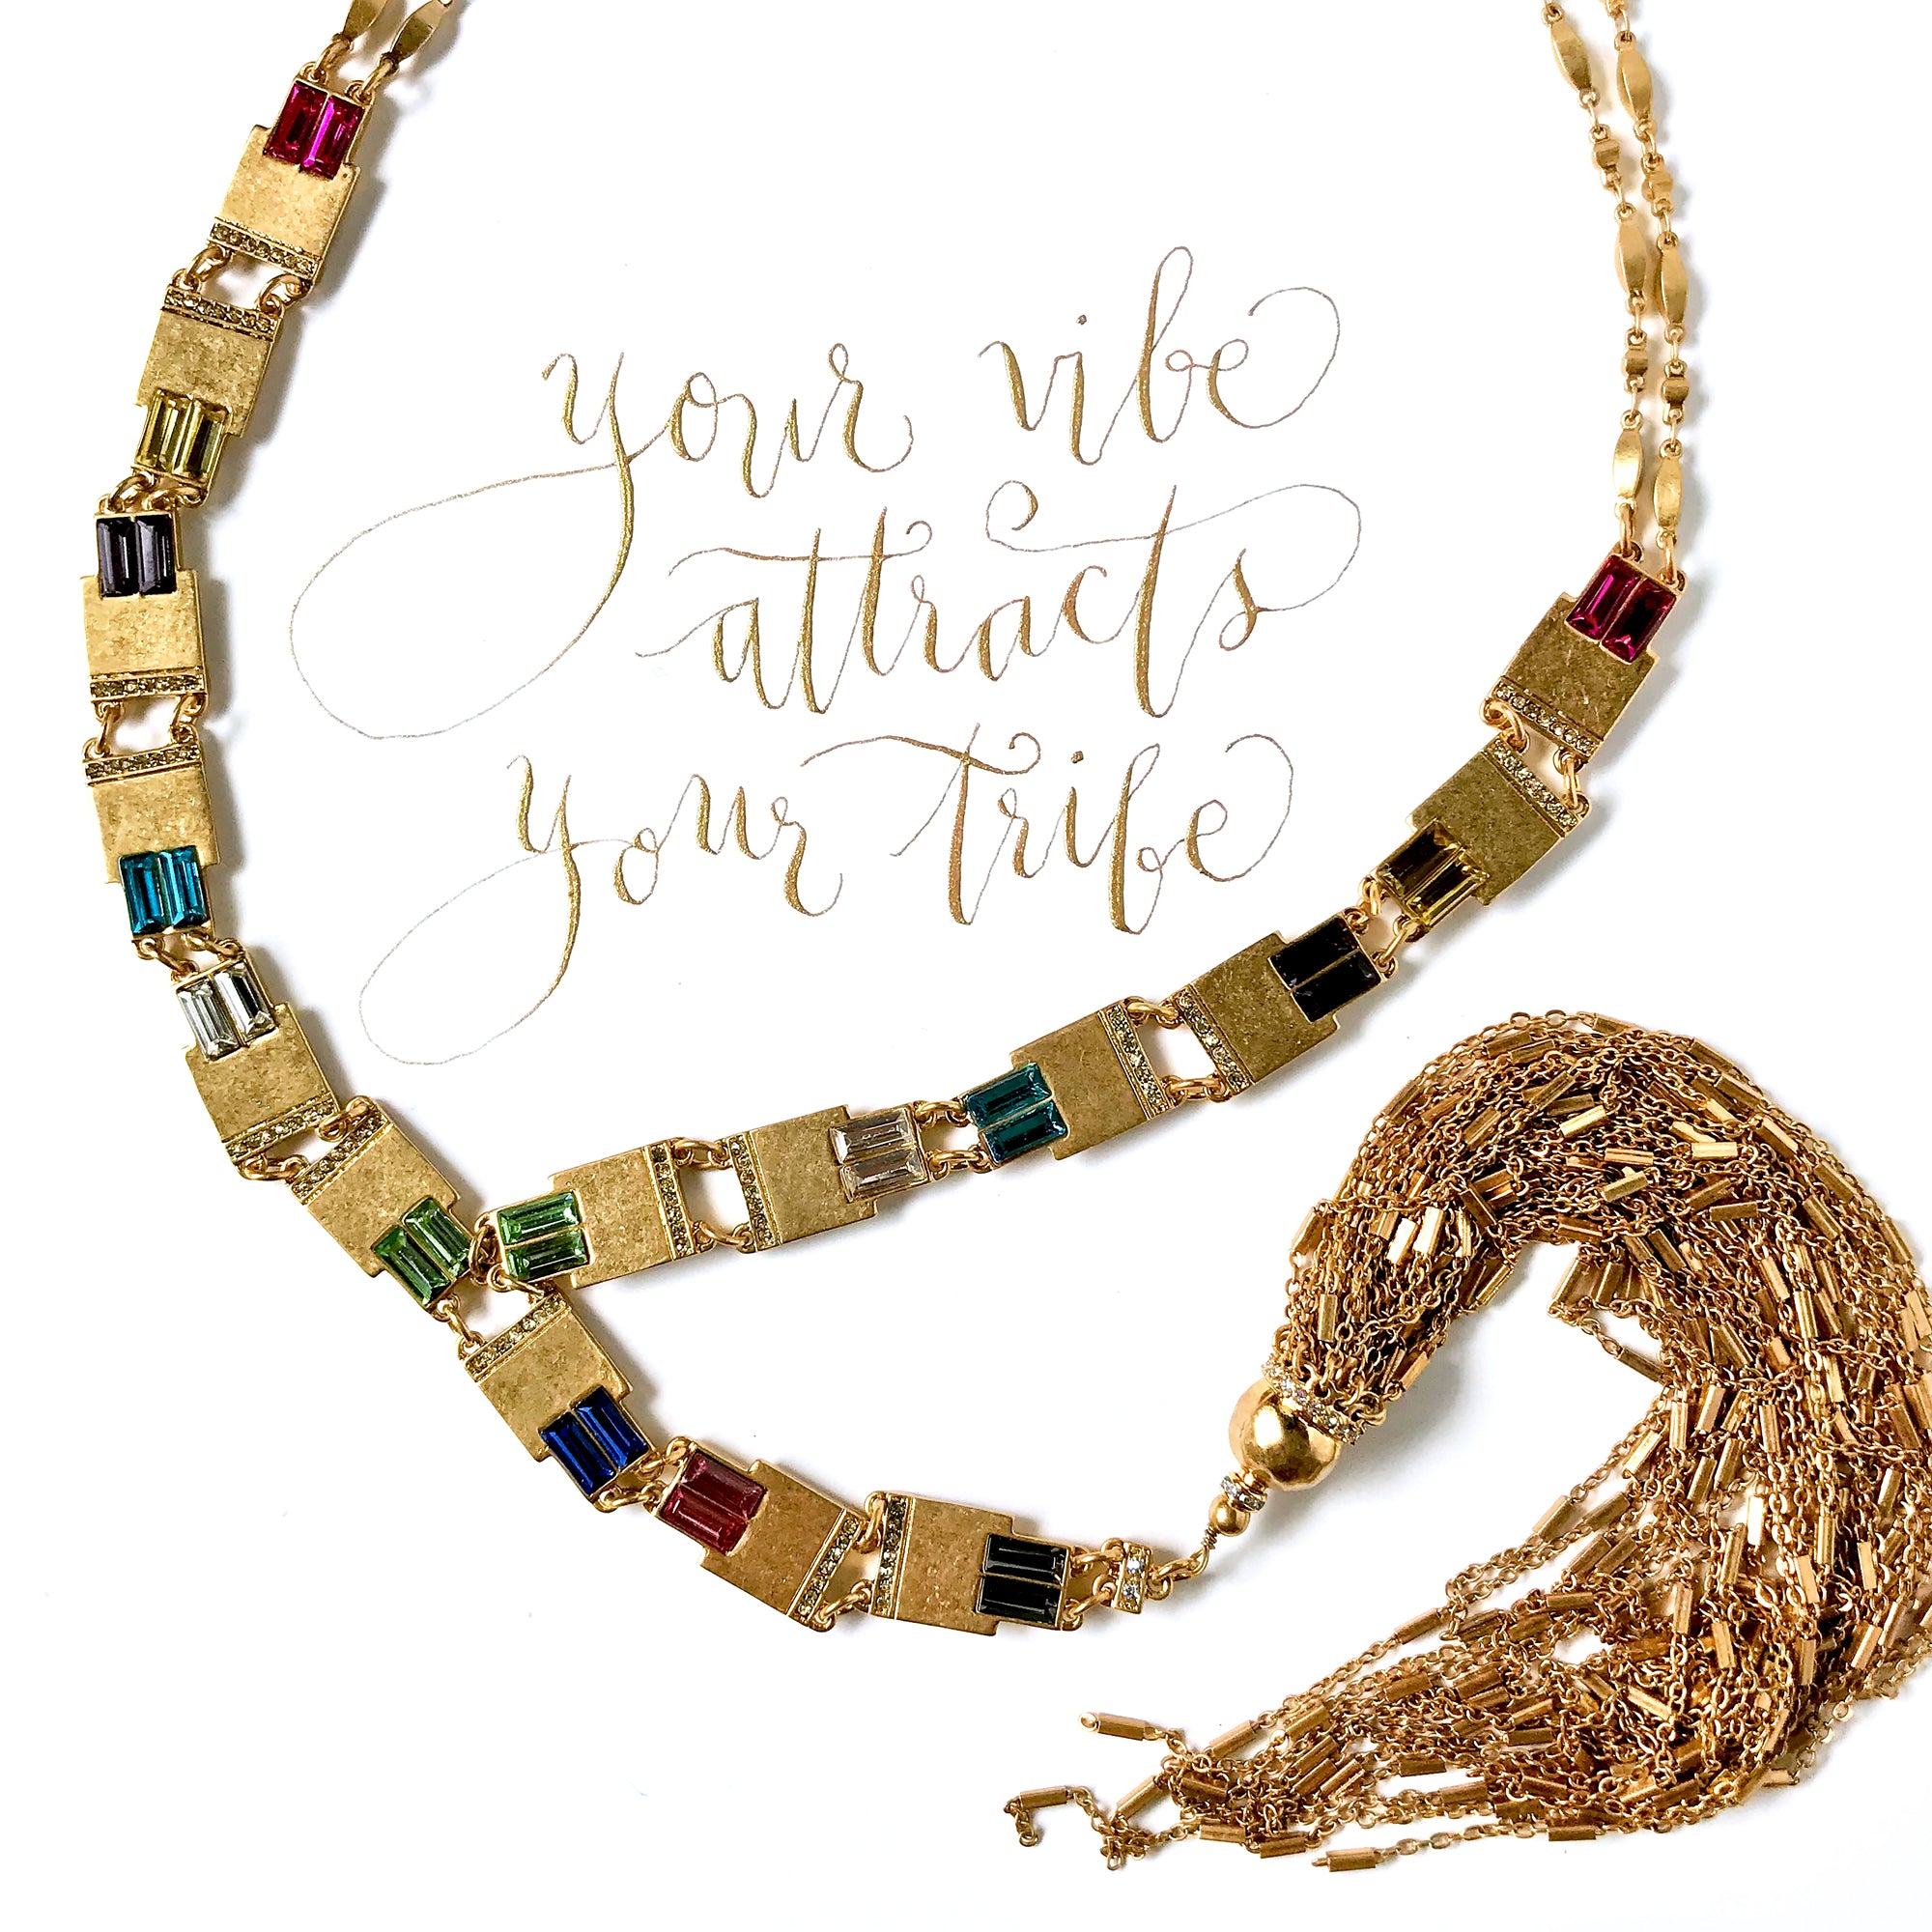 #SequinSayings - Your Vibe Attracts Your Tribe